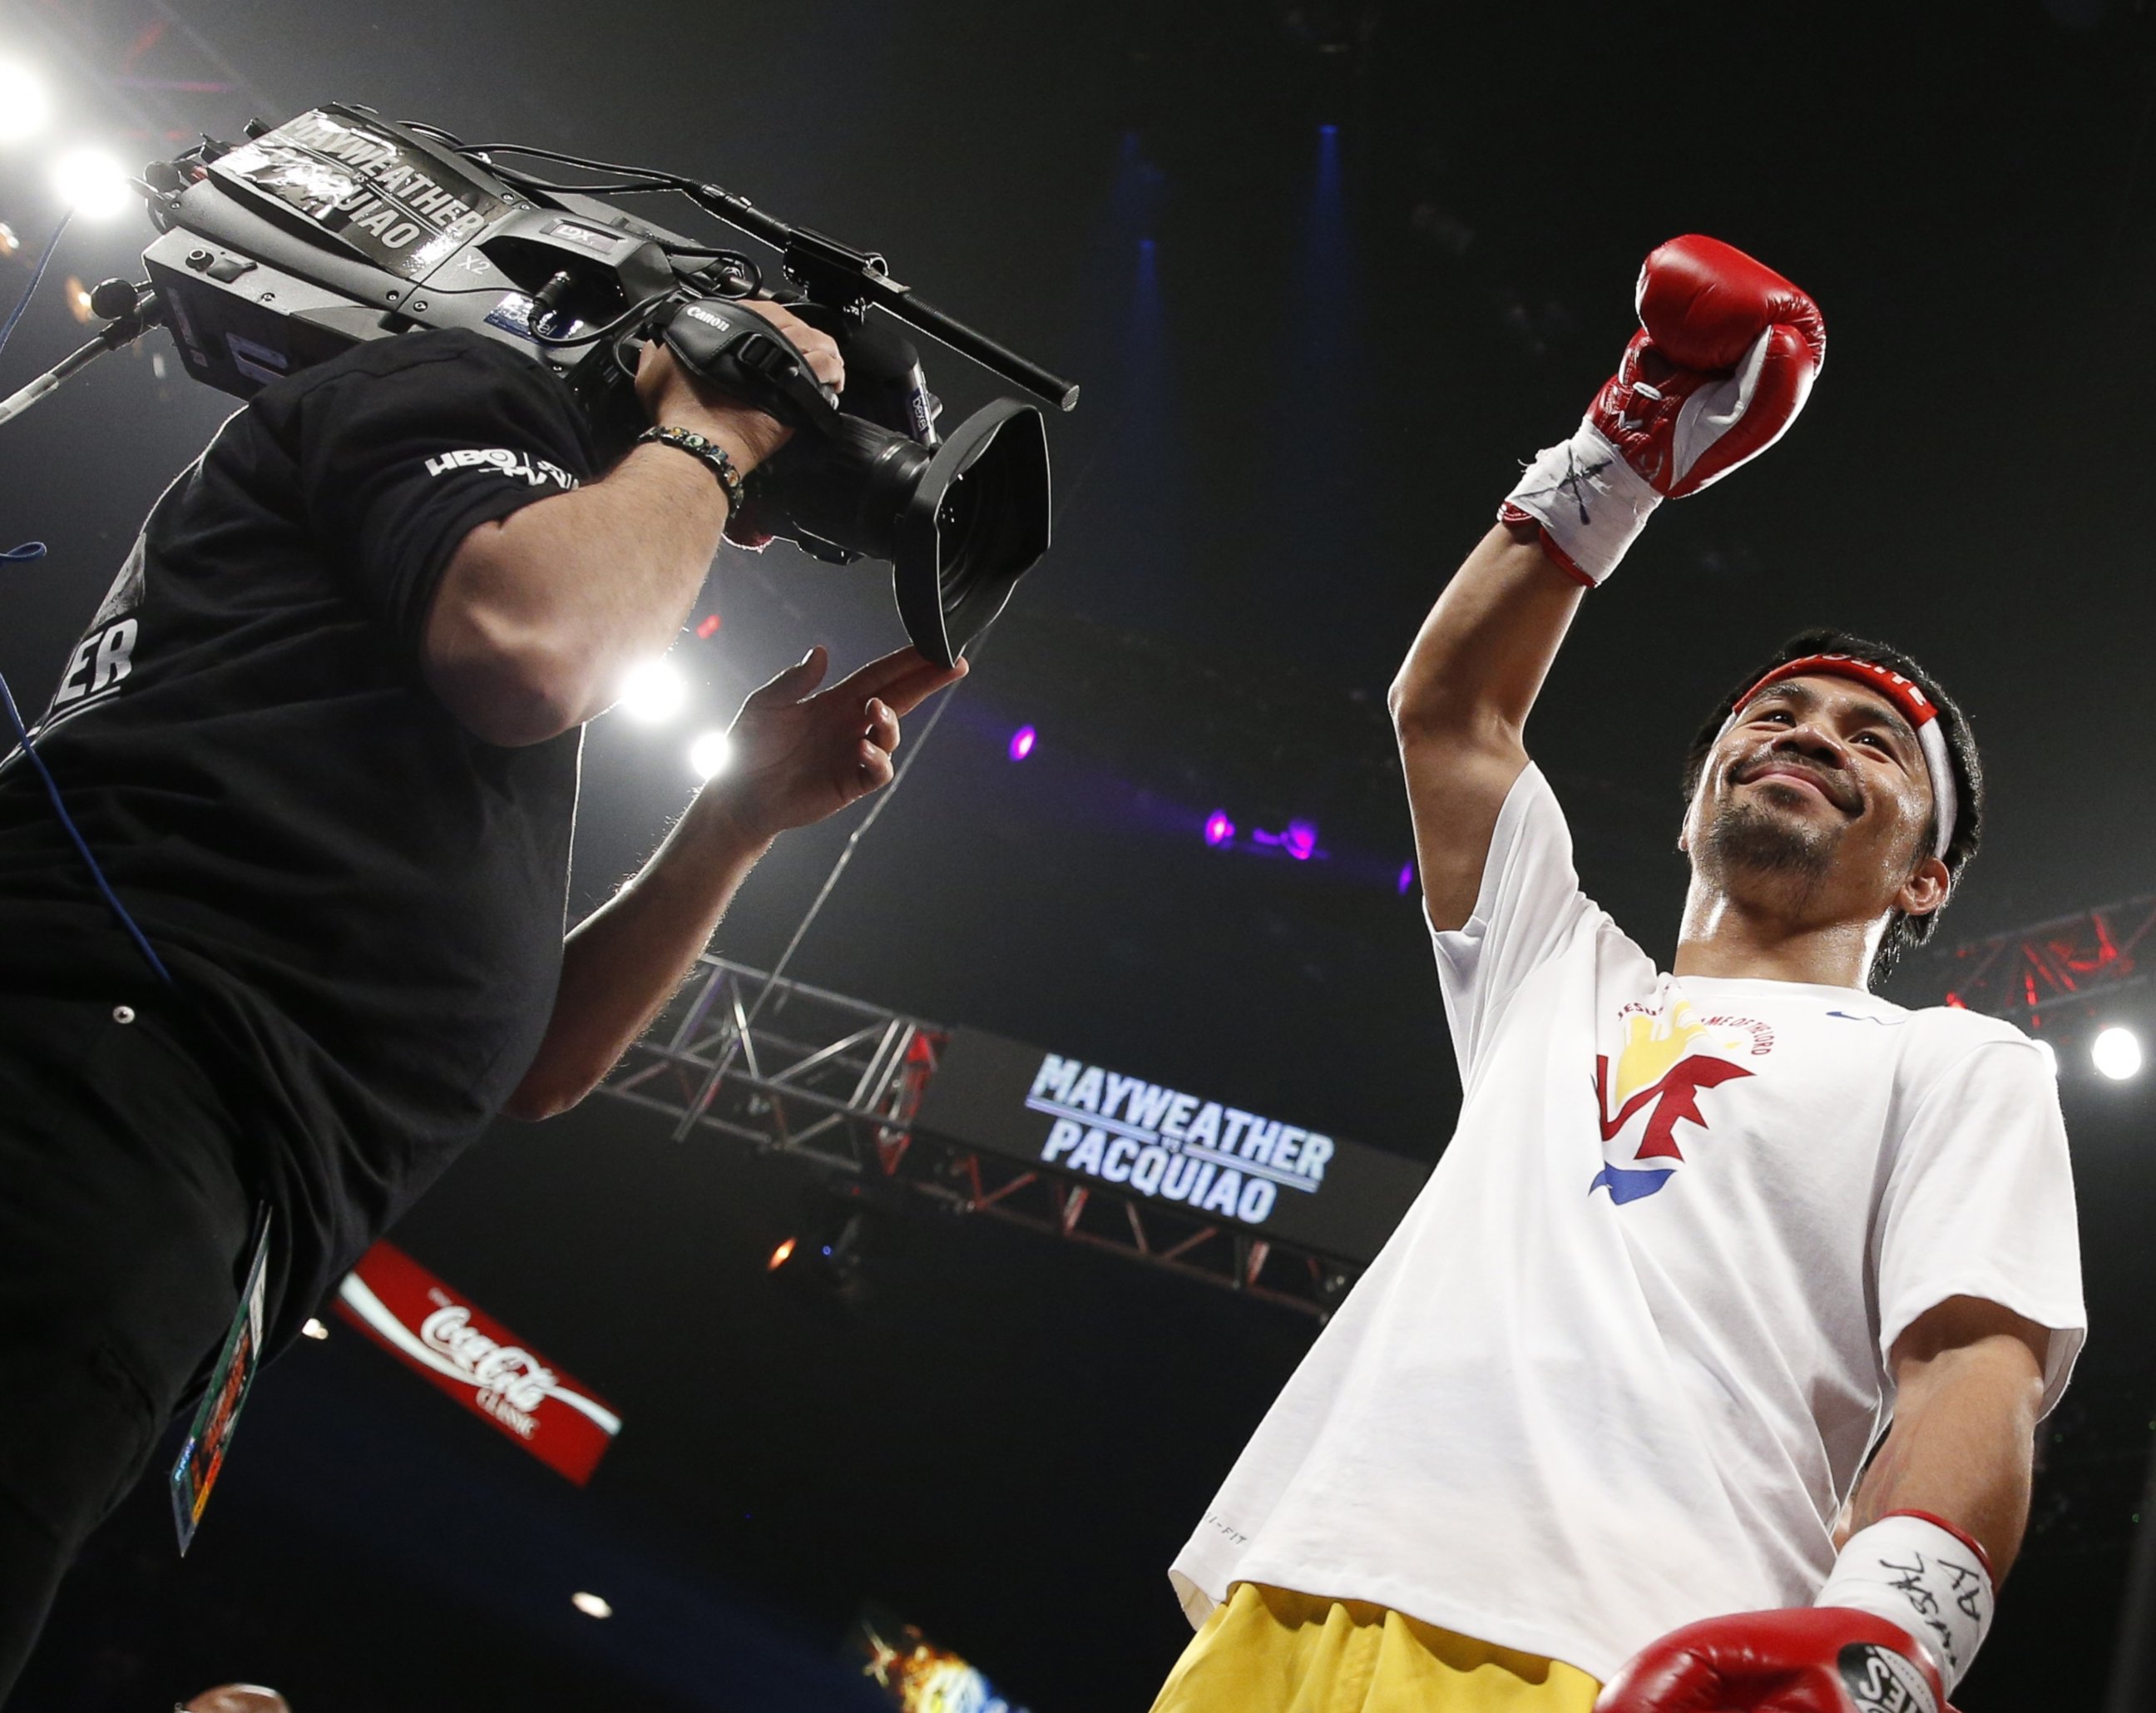 PHOTO: Manny Pacquiao, from the Philippines, acknowledges the crowd before the start of his world welterweight championship bout against Floyd Mayweather Jr., on Saturday, May 2, 2015 in Las Vegas.  